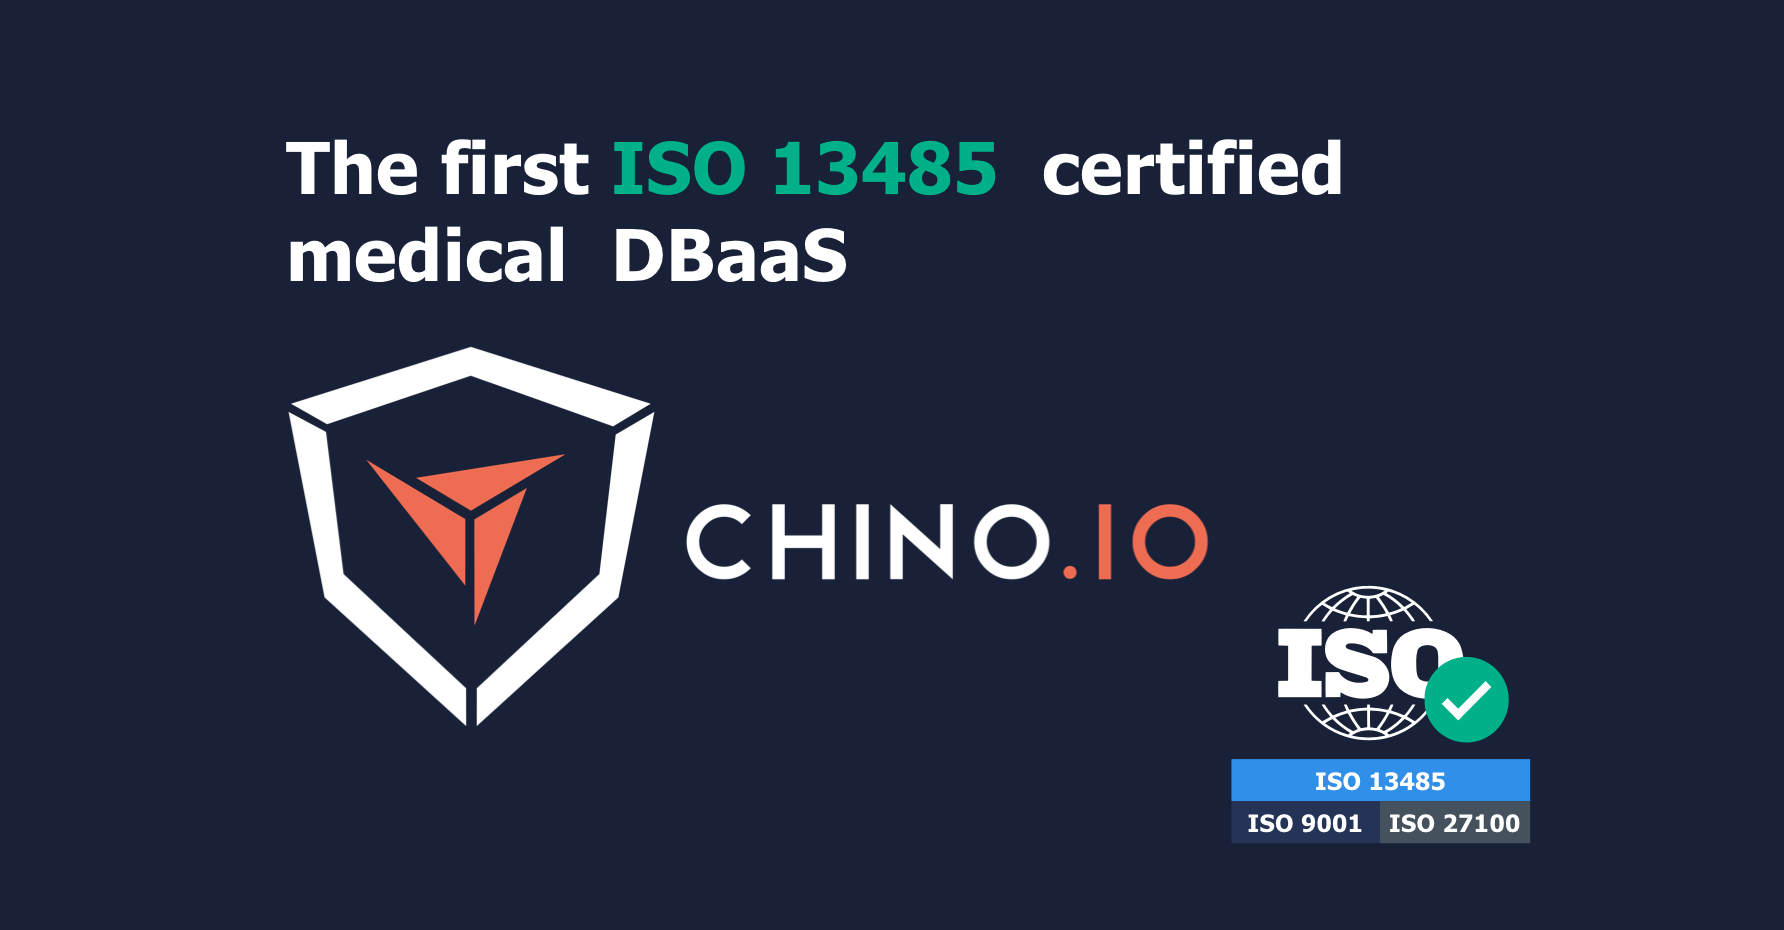 It's official- Chino.io the only DBaaS provider with ISO13485